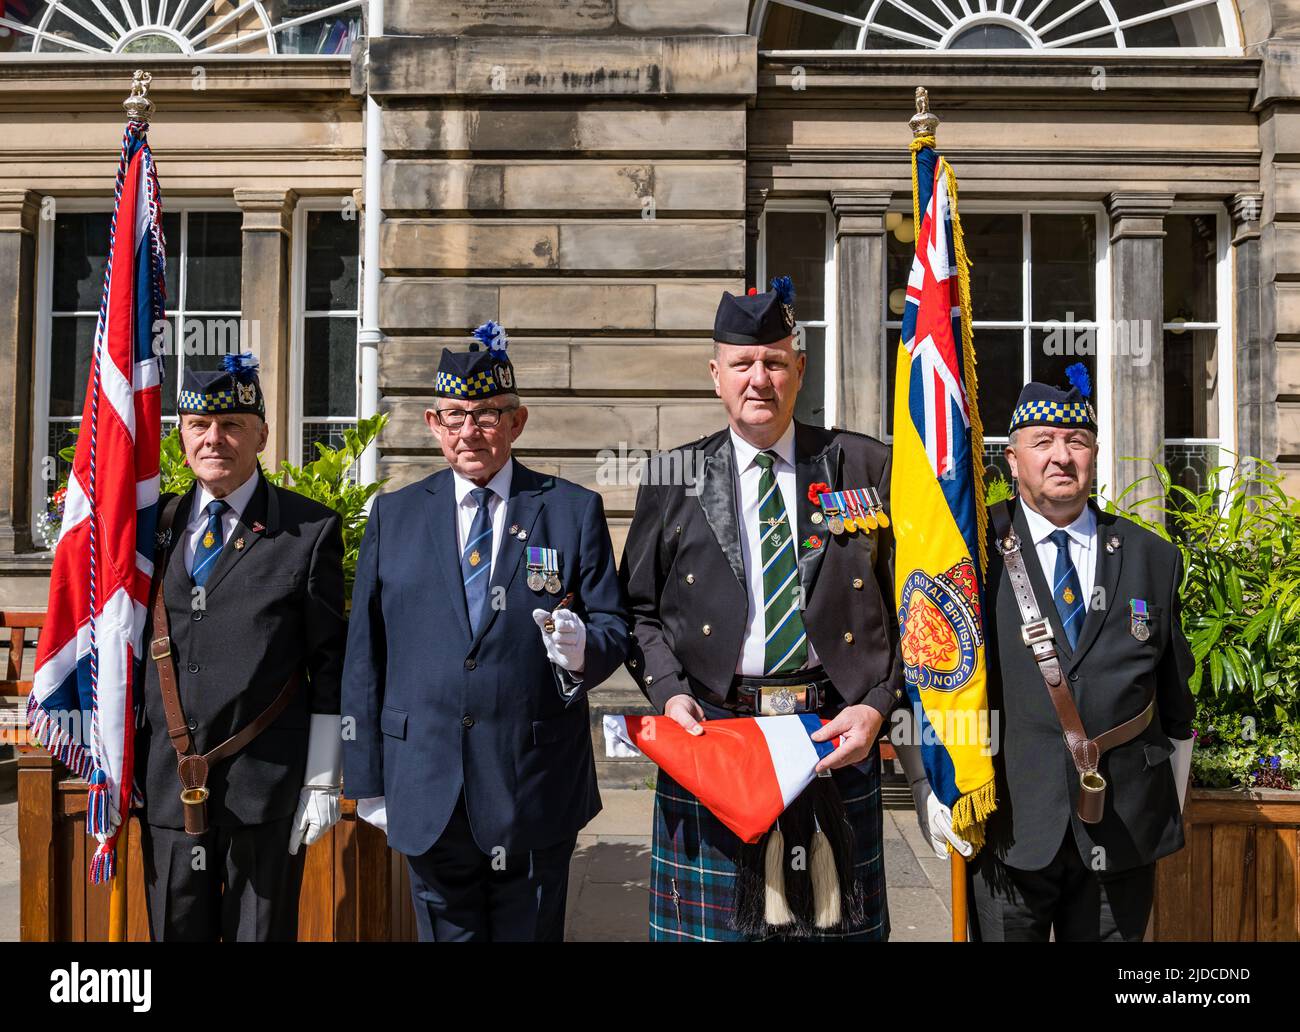 City Chambers, Edinburgh, Scotland, United Kingdom, 20 June 2022. Armed Forces flag raising ceremony: A procession with Armed Forces Day flag at City Chambers with a Parade Marshall and standard bearers. The Flag Raising Ceremony is a national event to honour Armed Forces personnel. Pictured: Legion Scotland Parade Marshall (Tommy Hermiston), standard bearers (Paul Cooper and David Cutler) and Eddie Maley, who will carry the flag Stock Photo